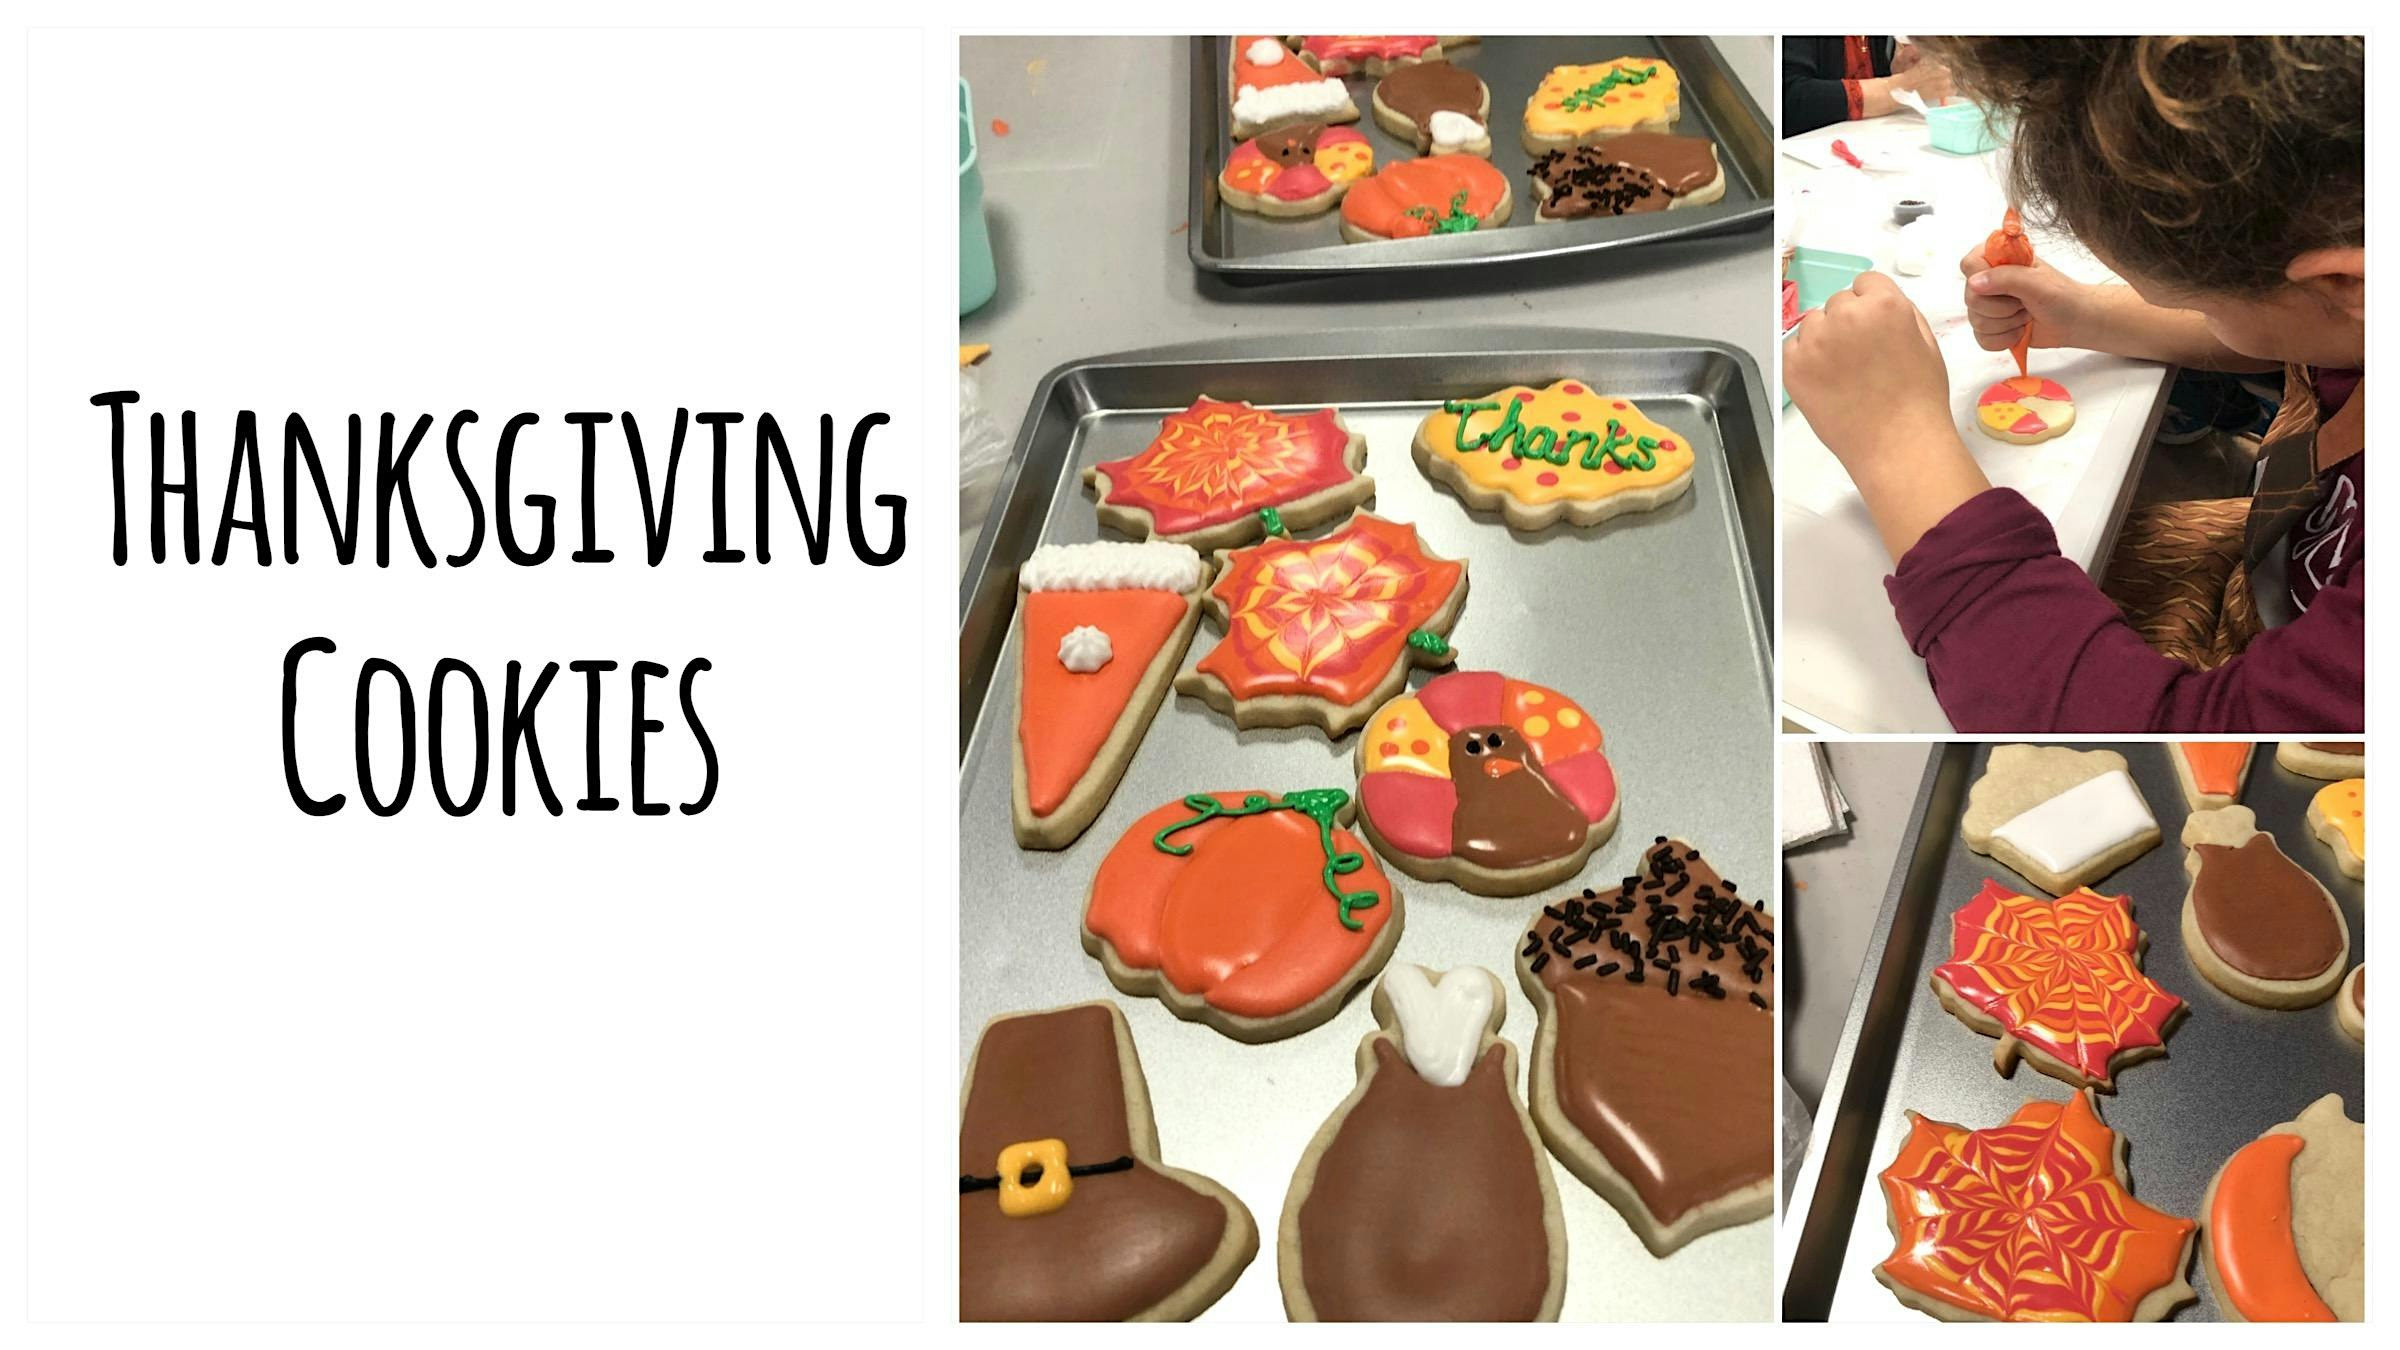 Thanksgiving Sugar Cookie Decorating Class